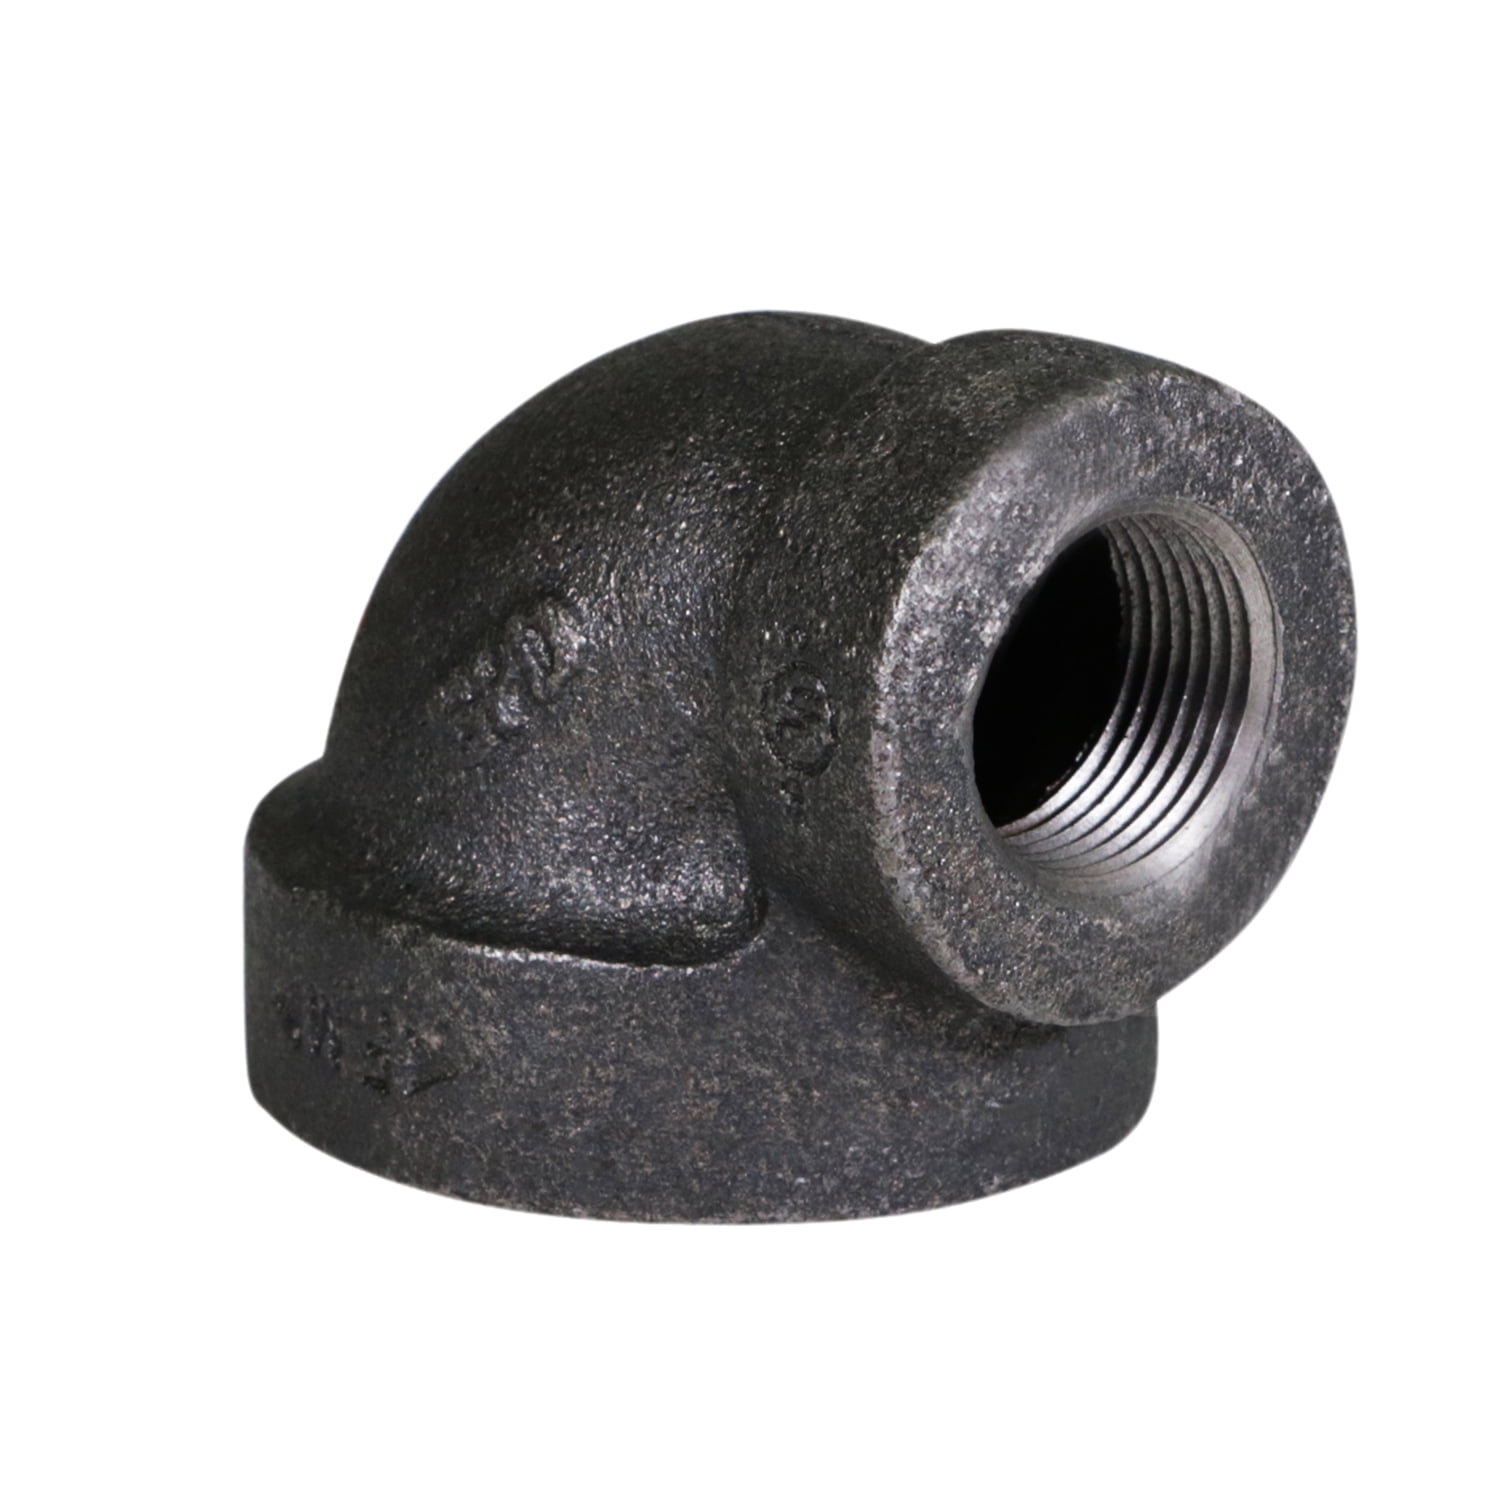 1" X 1/2" BSP Reducing Elbow 90° Female/Female Black Malleable Iron Fitting